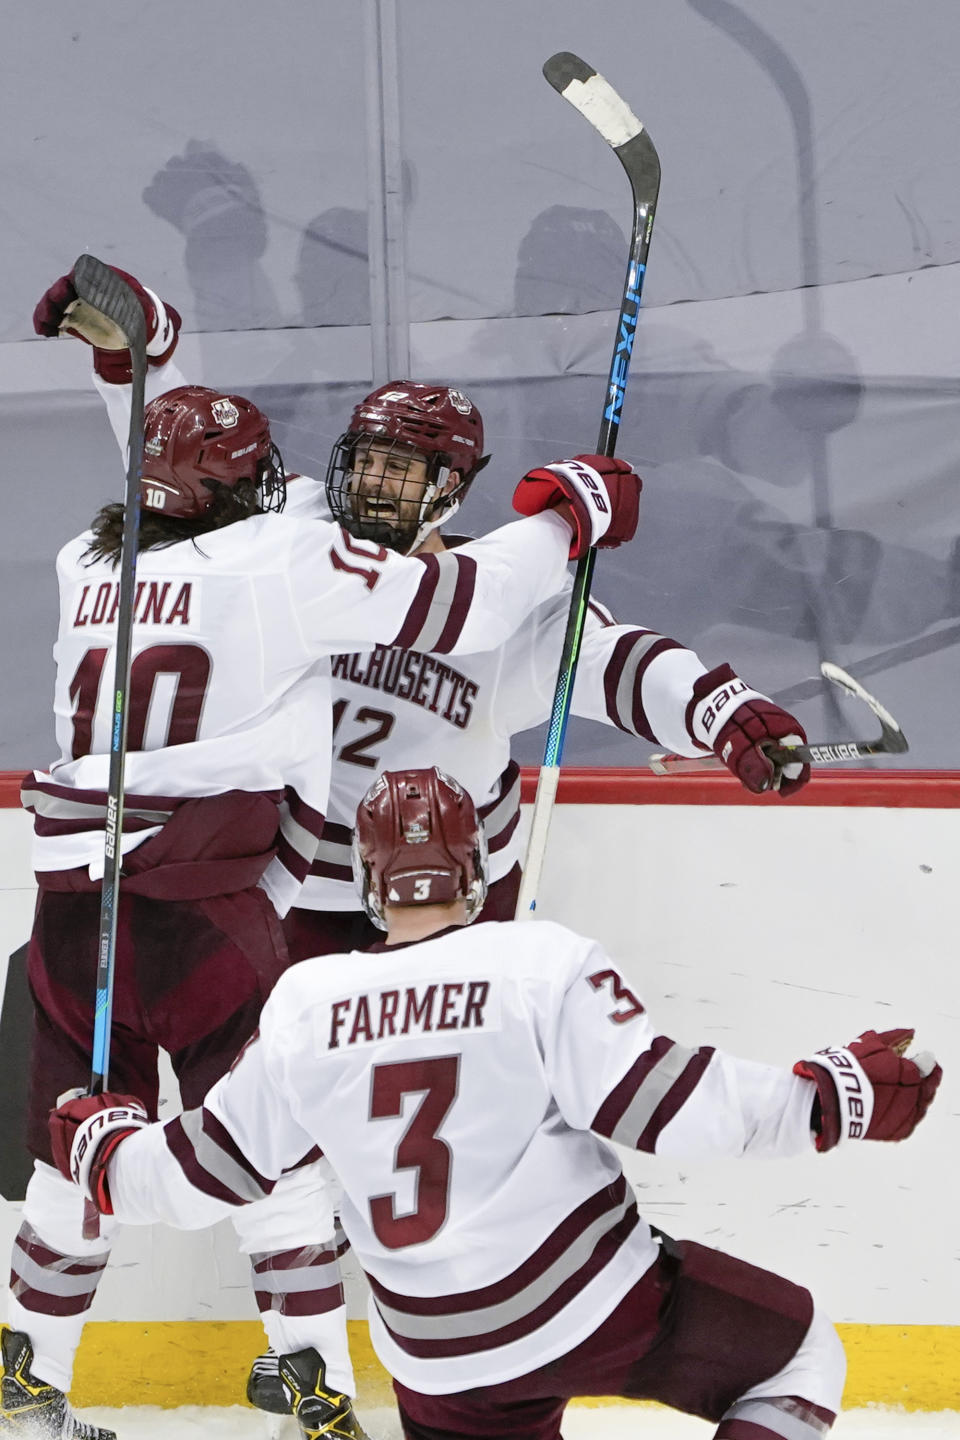 Massachusetts' Garrett Wait (12) celebrates with Josh Lopina (10) and Ty Farmer (3) after scoring in overtime against Minnesota Duluth in an NCAA men's Frozen Four hockey semifinal in Pittsburgh, early Friday, April 9, 2021. Massachusetts won 3-2 and will face St. Cloud State in the championship game Saturday. (AP Photo/Keith Srakocic)